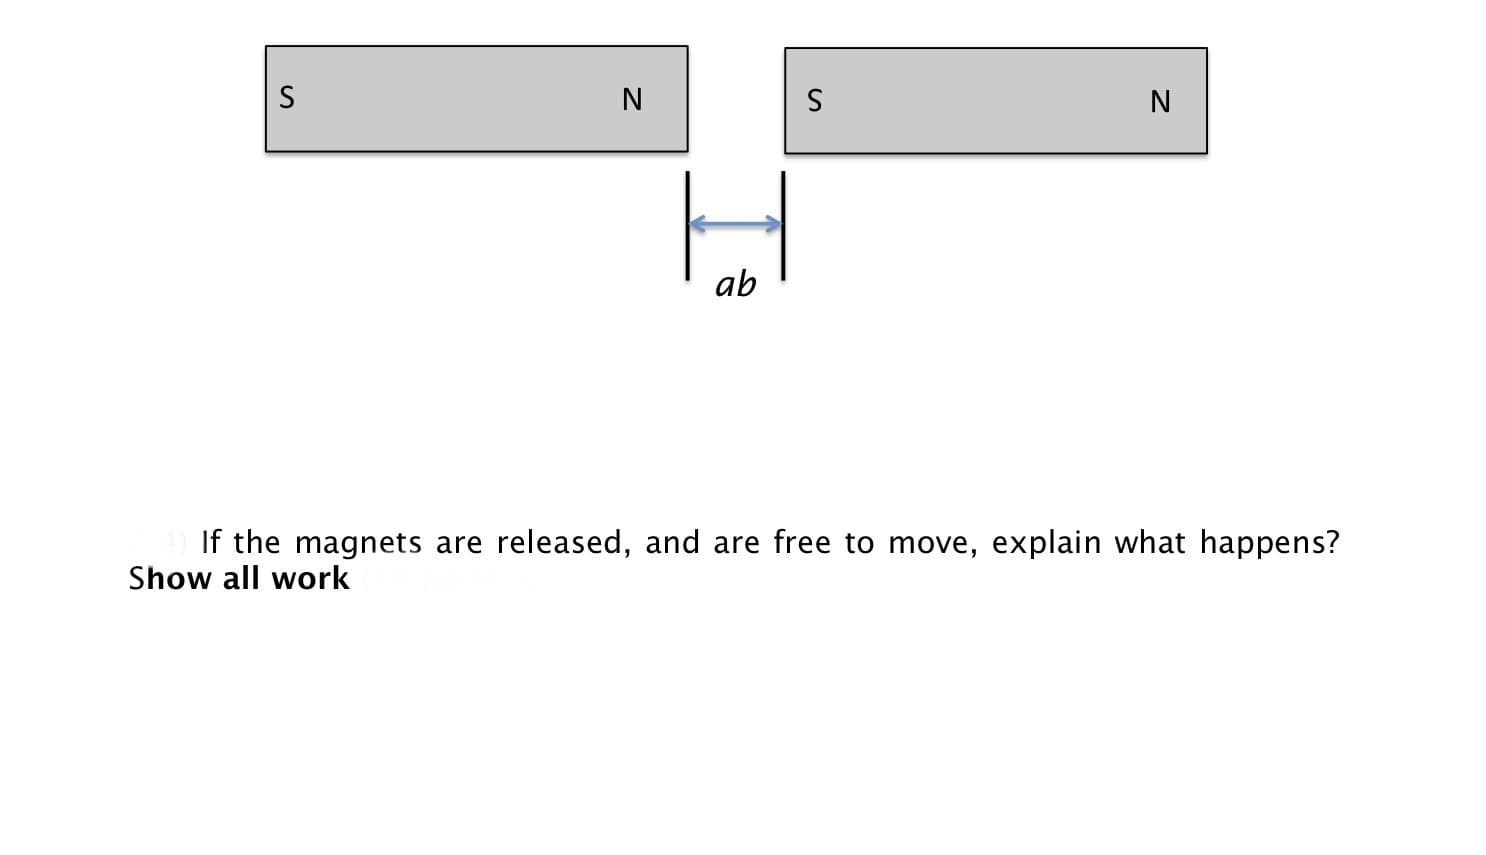 N
ab
If the magnets are released, and are free to move, explain what happens?
Show all work
